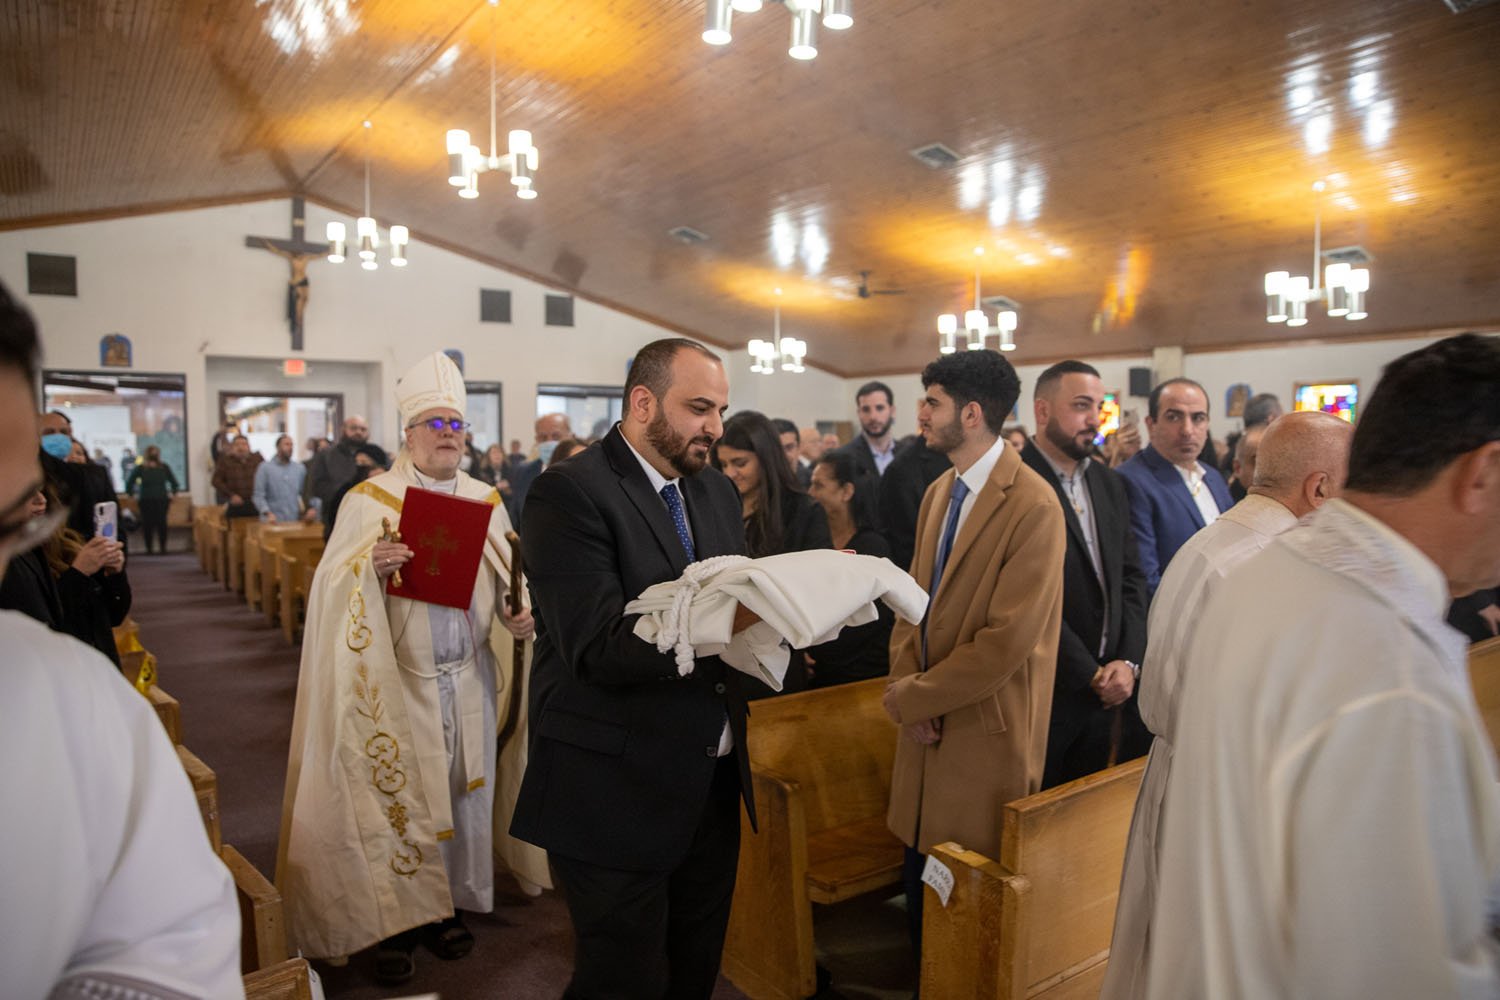  During the ceremony, Subdeacon Namir processed in carrying a stole in his hands. 